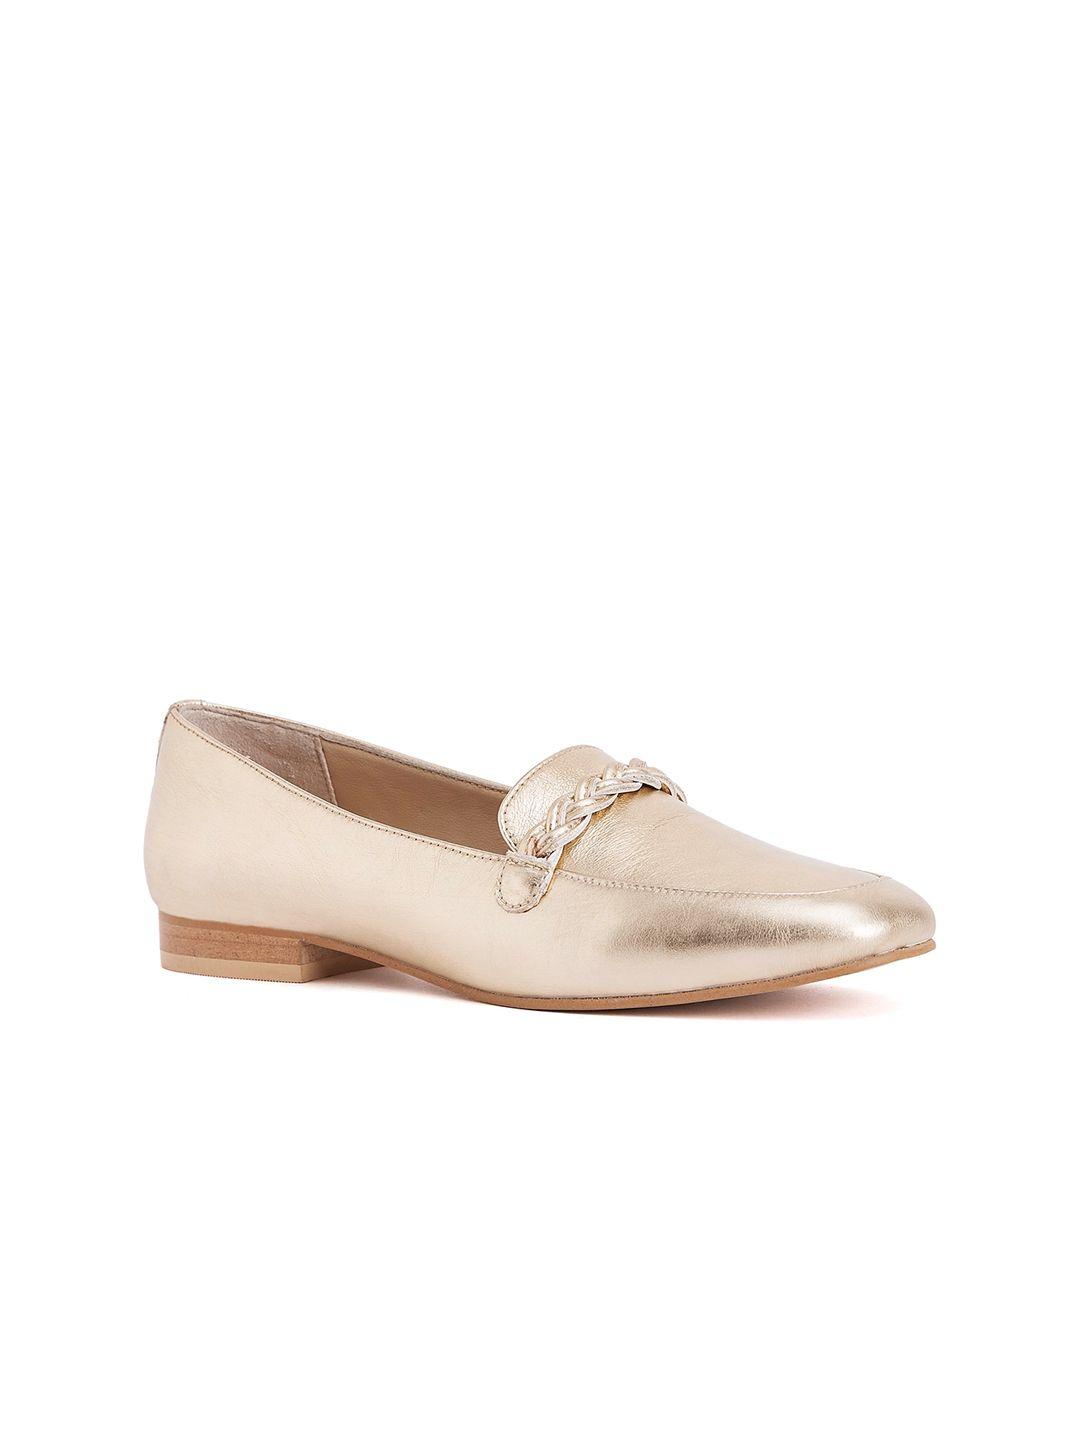 peach-flores-women-solid-leather-loafers